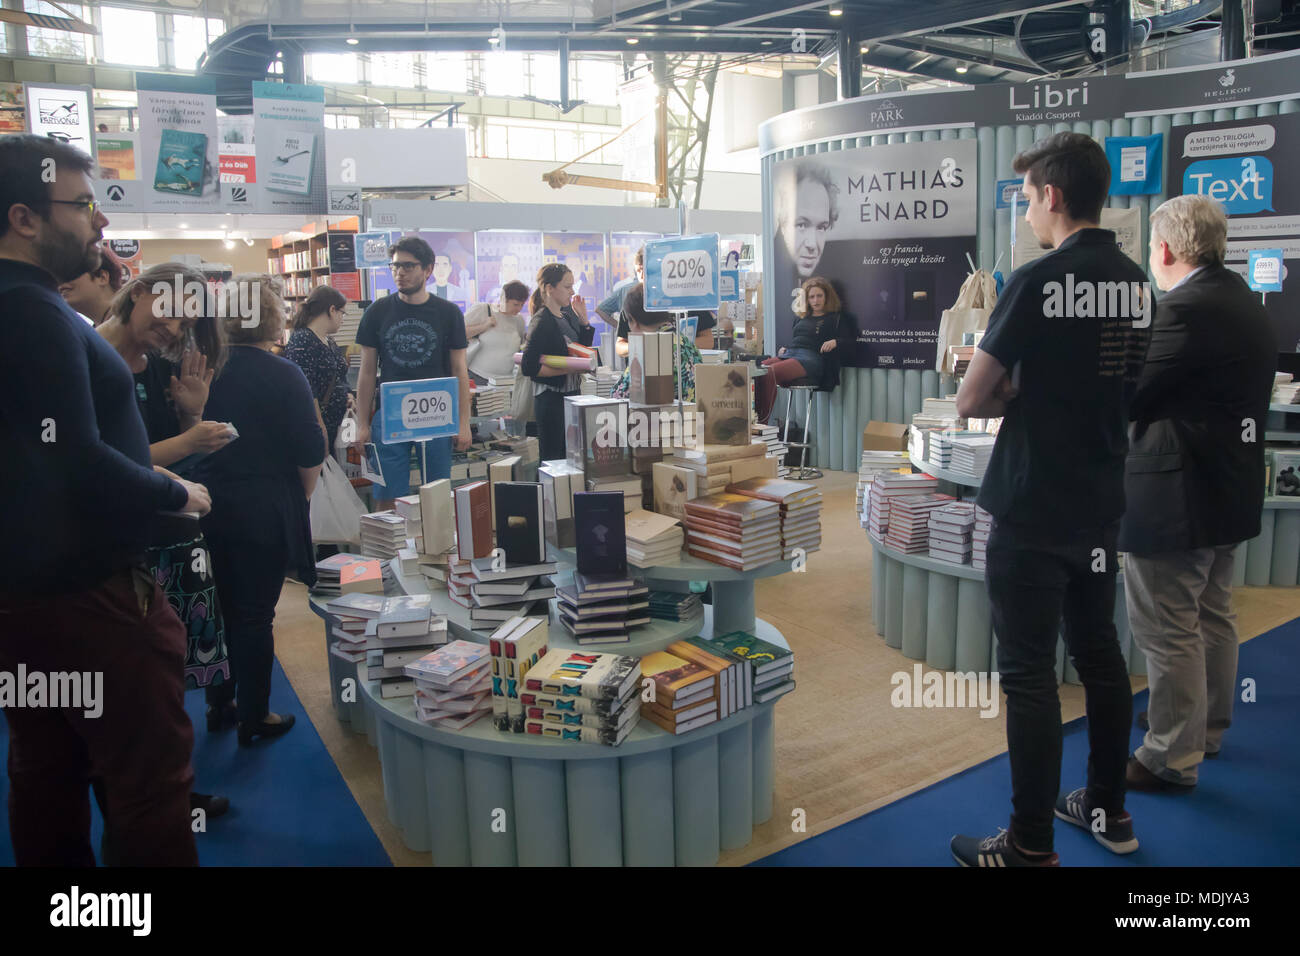 Budapest, Hungary. 19th Apr, 2018. People visit the 25th Budapest International Book Festival in Budapest, Hungary, on April 19, 2018. The 25th Budapest International Book Festival was inaugurated on Thursday with the attribution of the Budapest Grand Prize to German-Austrian writer Daniel Kehlmann. Credit: Attila Volgyi/Xinhua/Alamy Live News Stock Photo